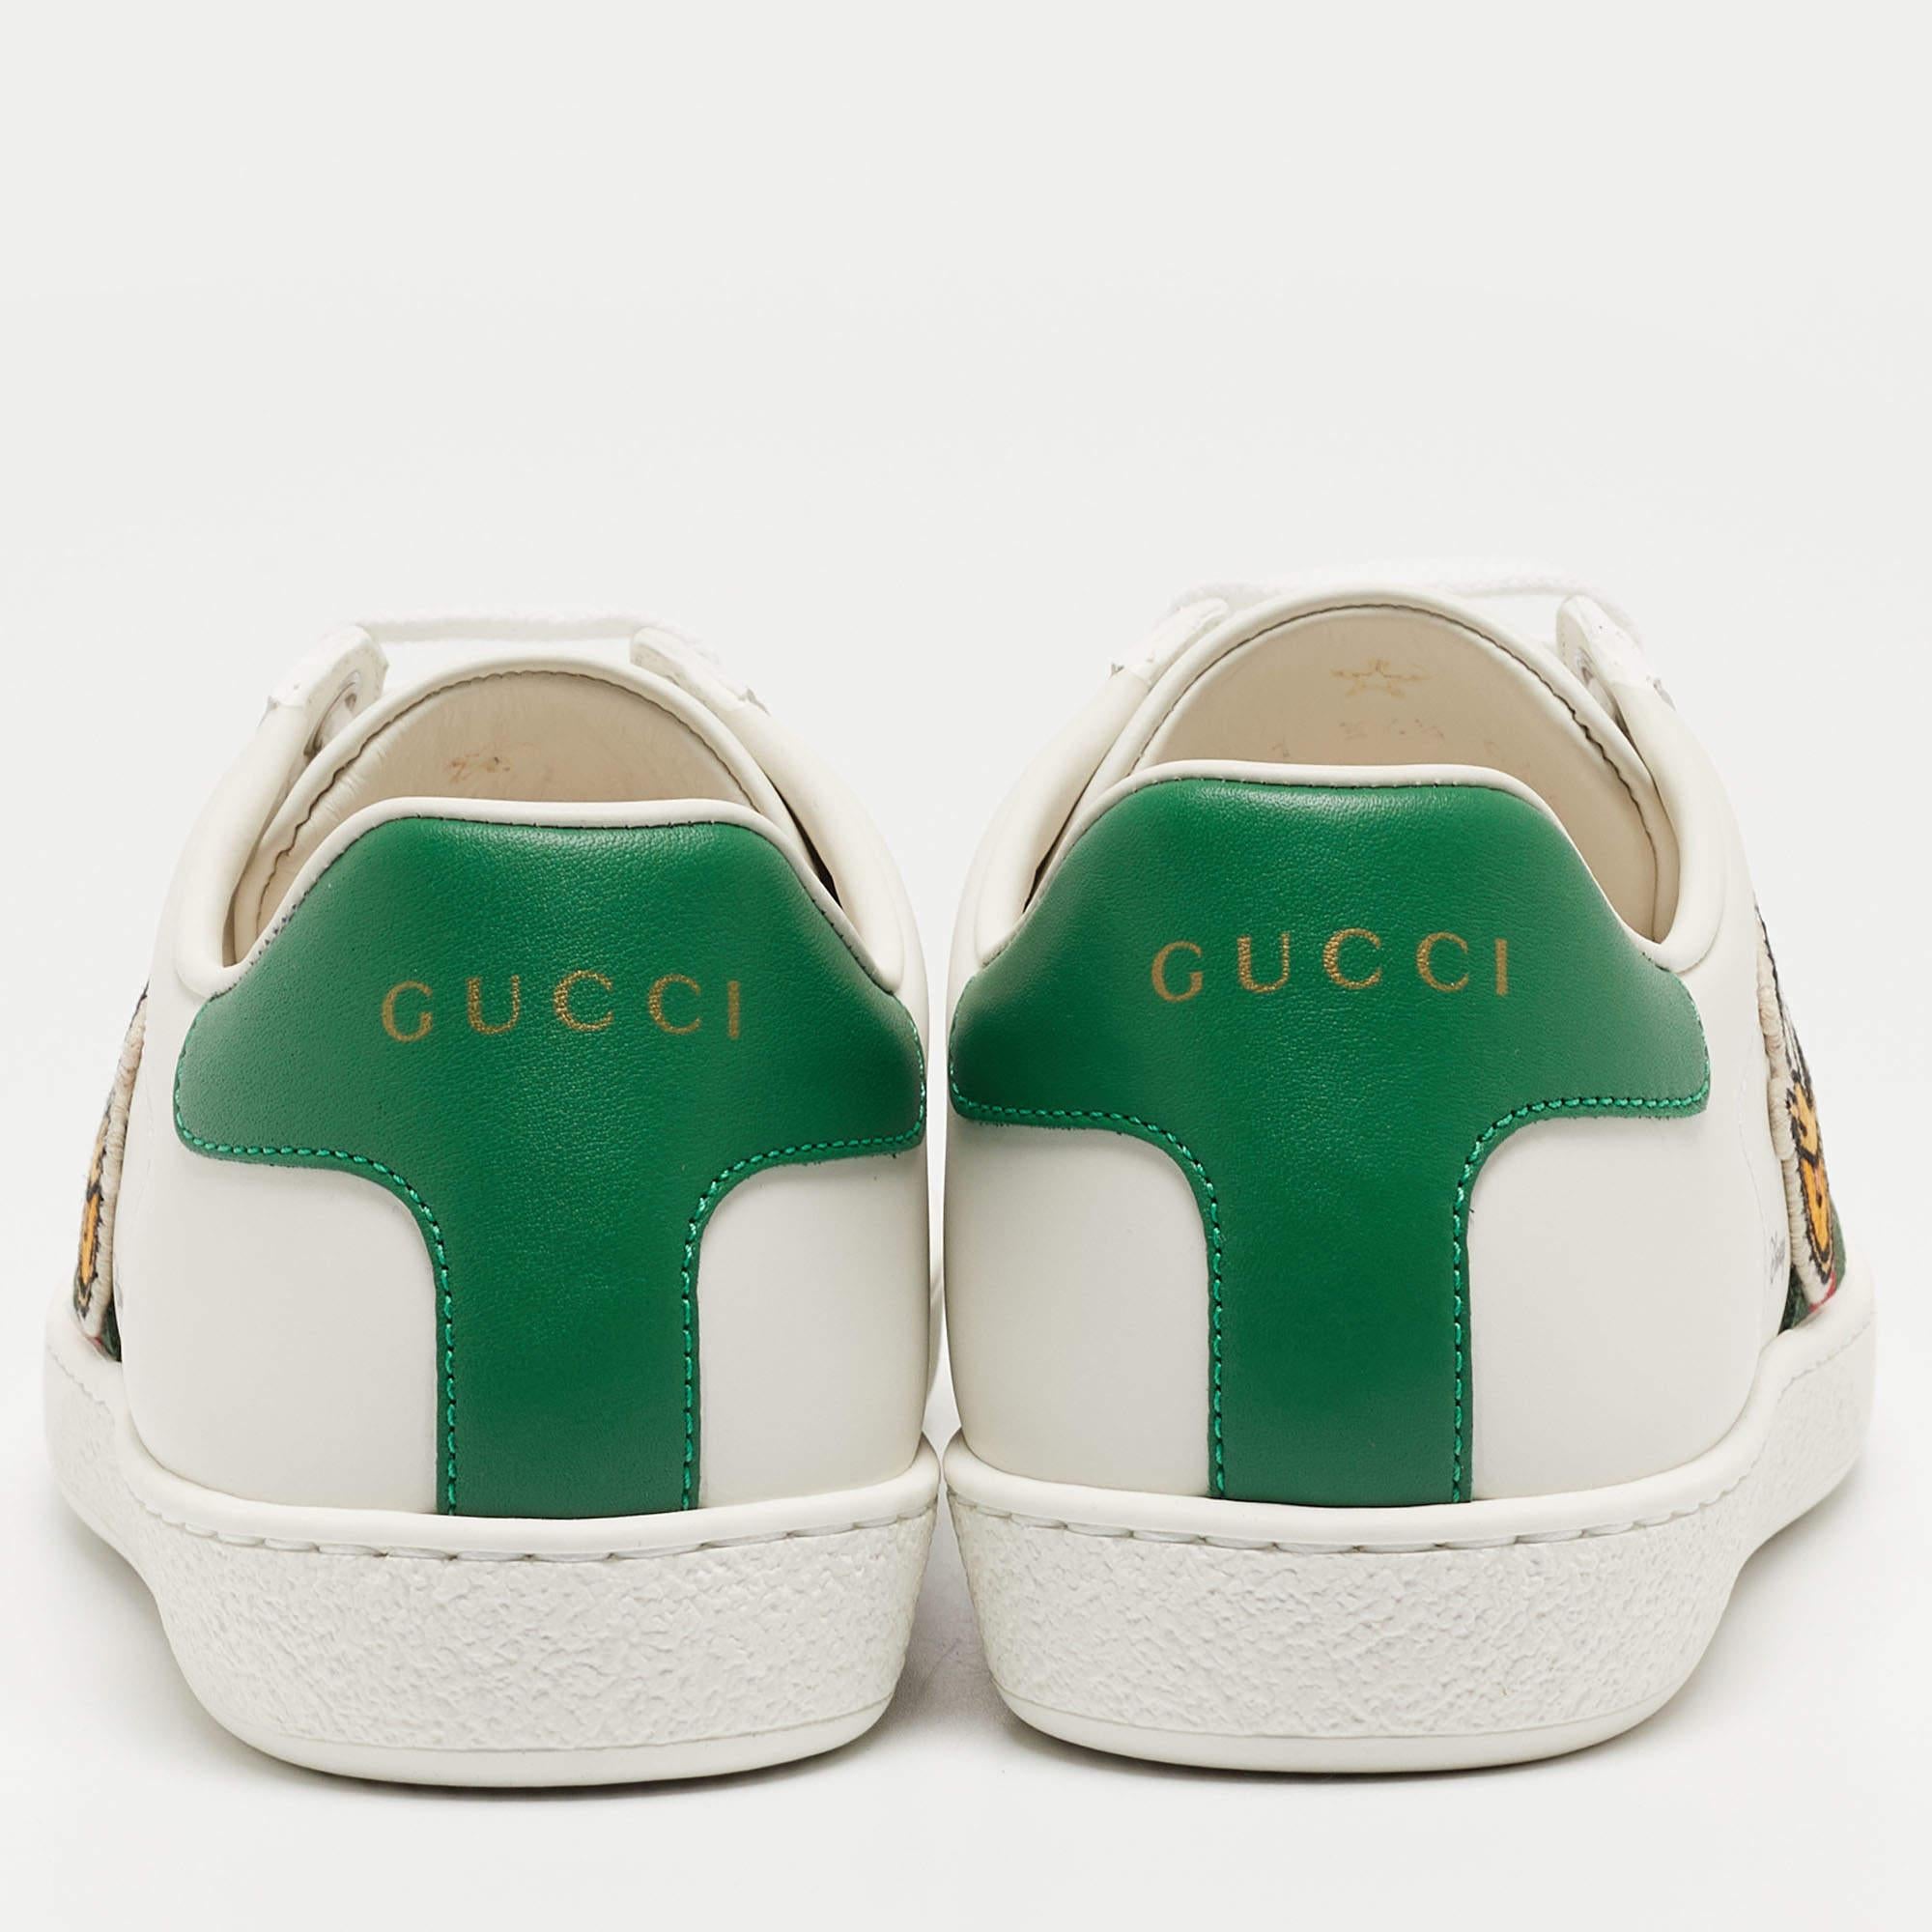 Coming in a classic silhouette, these Gucci Ace sneakers are a seamless combination of luxury, comfort, and style. These sneakers are designed with signature details and comfortable insoles.

Includes: Original Dustbag, Original Box, Extra Laces,